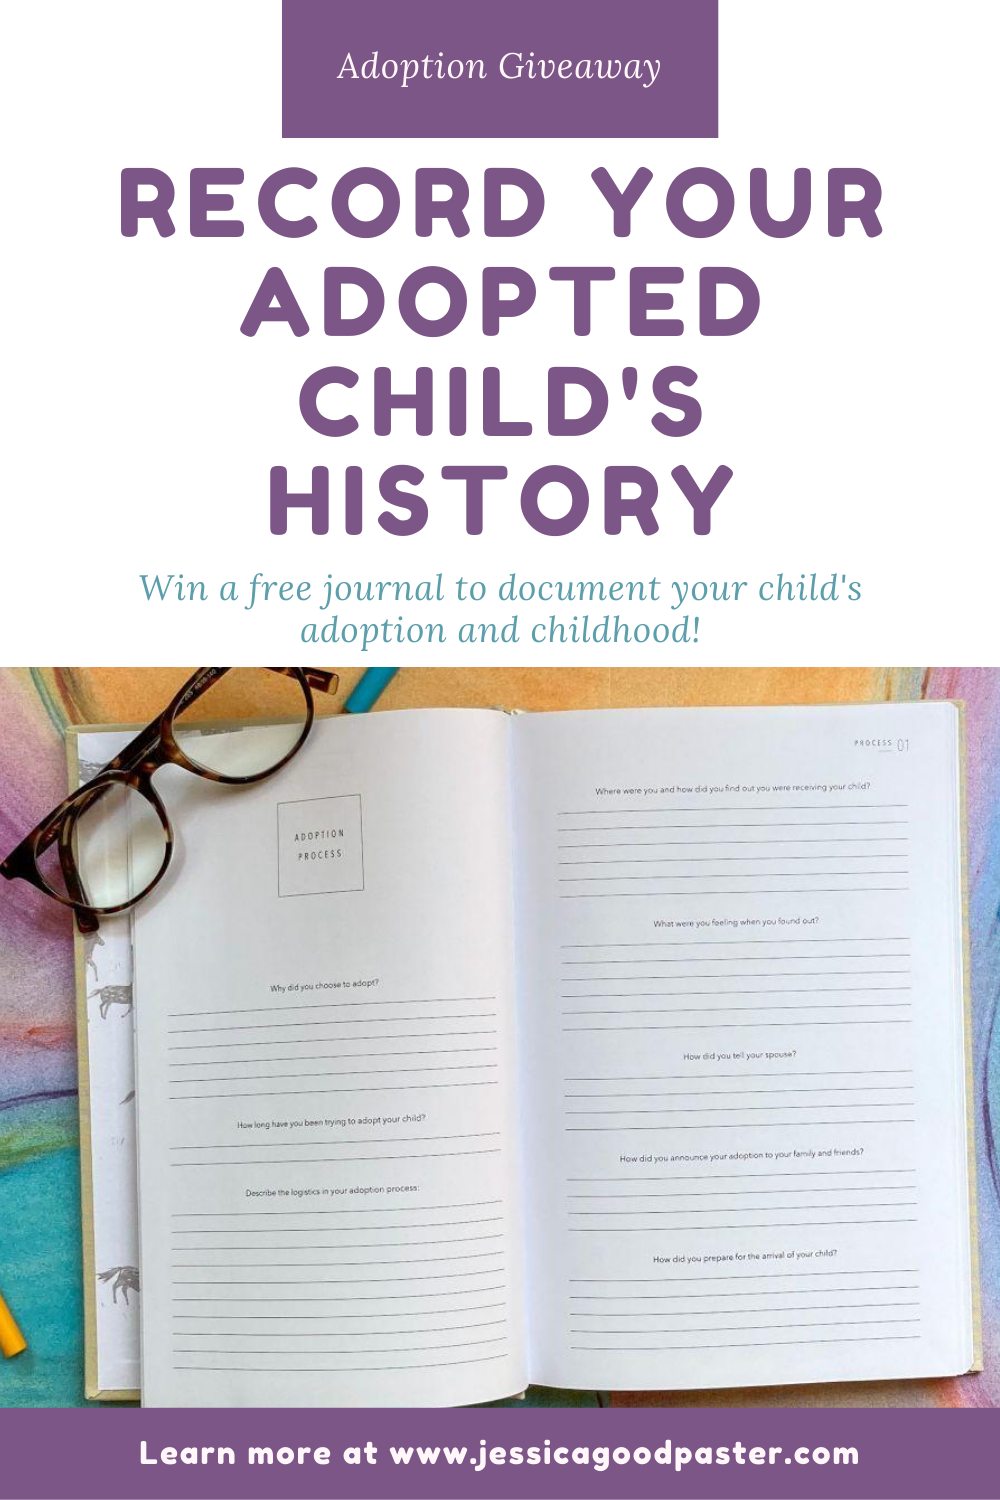 Enter to win a beautiful Adoption History Journal from Promptly Journals! Track and document the adoption process, journey, and childhood history of your adopted child in this unique journal. Perfect for your domestic newborn adoption or as a gift. Valued at over $30! #giveaway #adoption #journal #adoptionjournal #babybook #gift #adoptionjourney